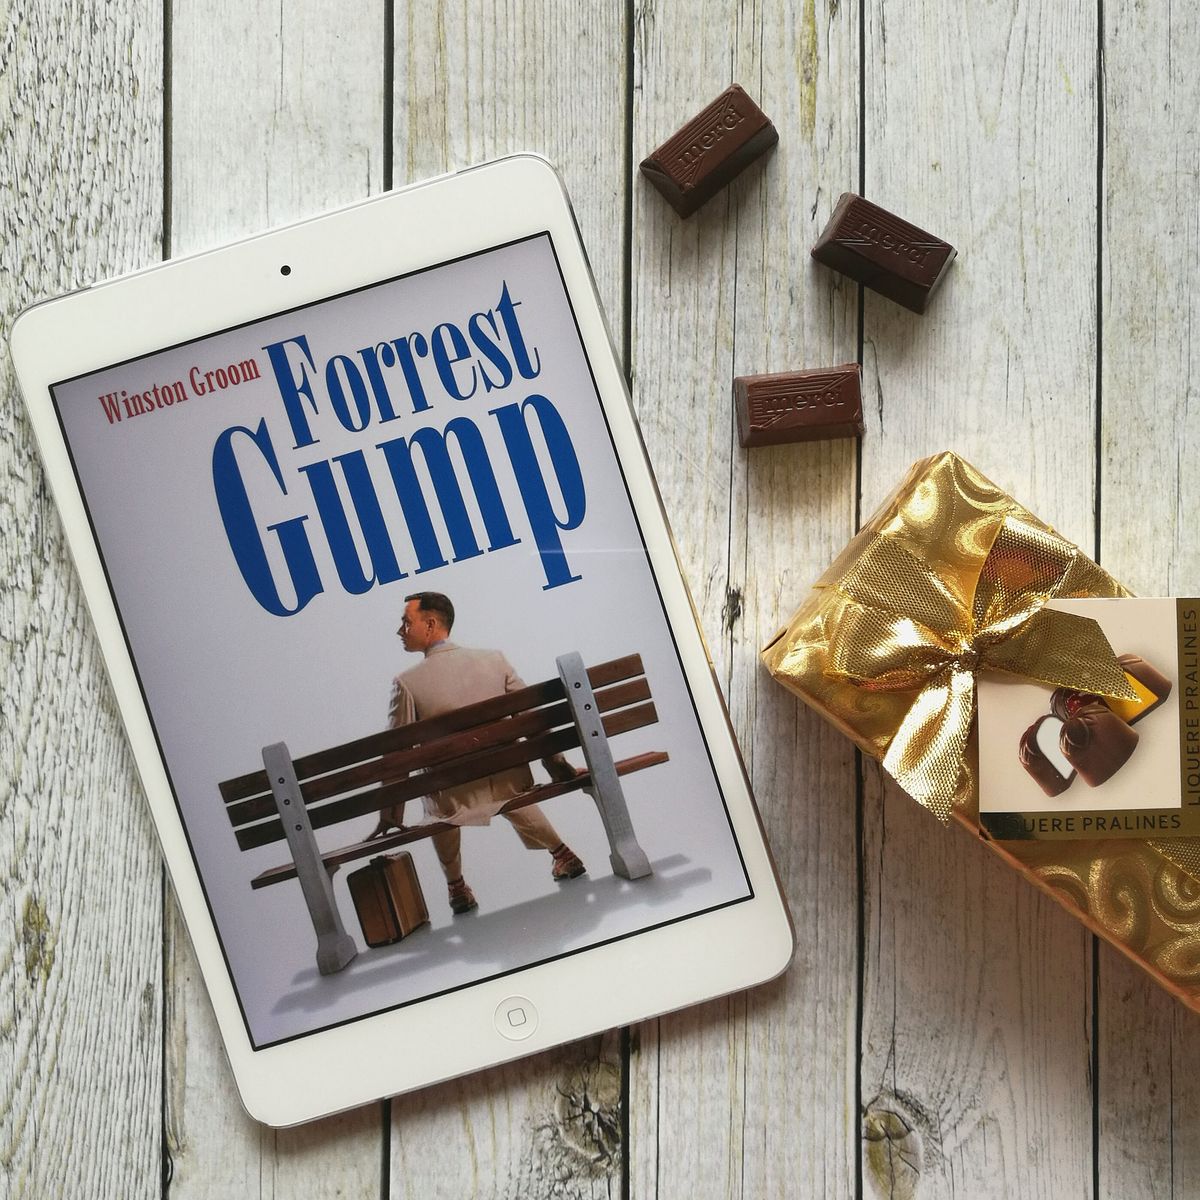 gump and co book